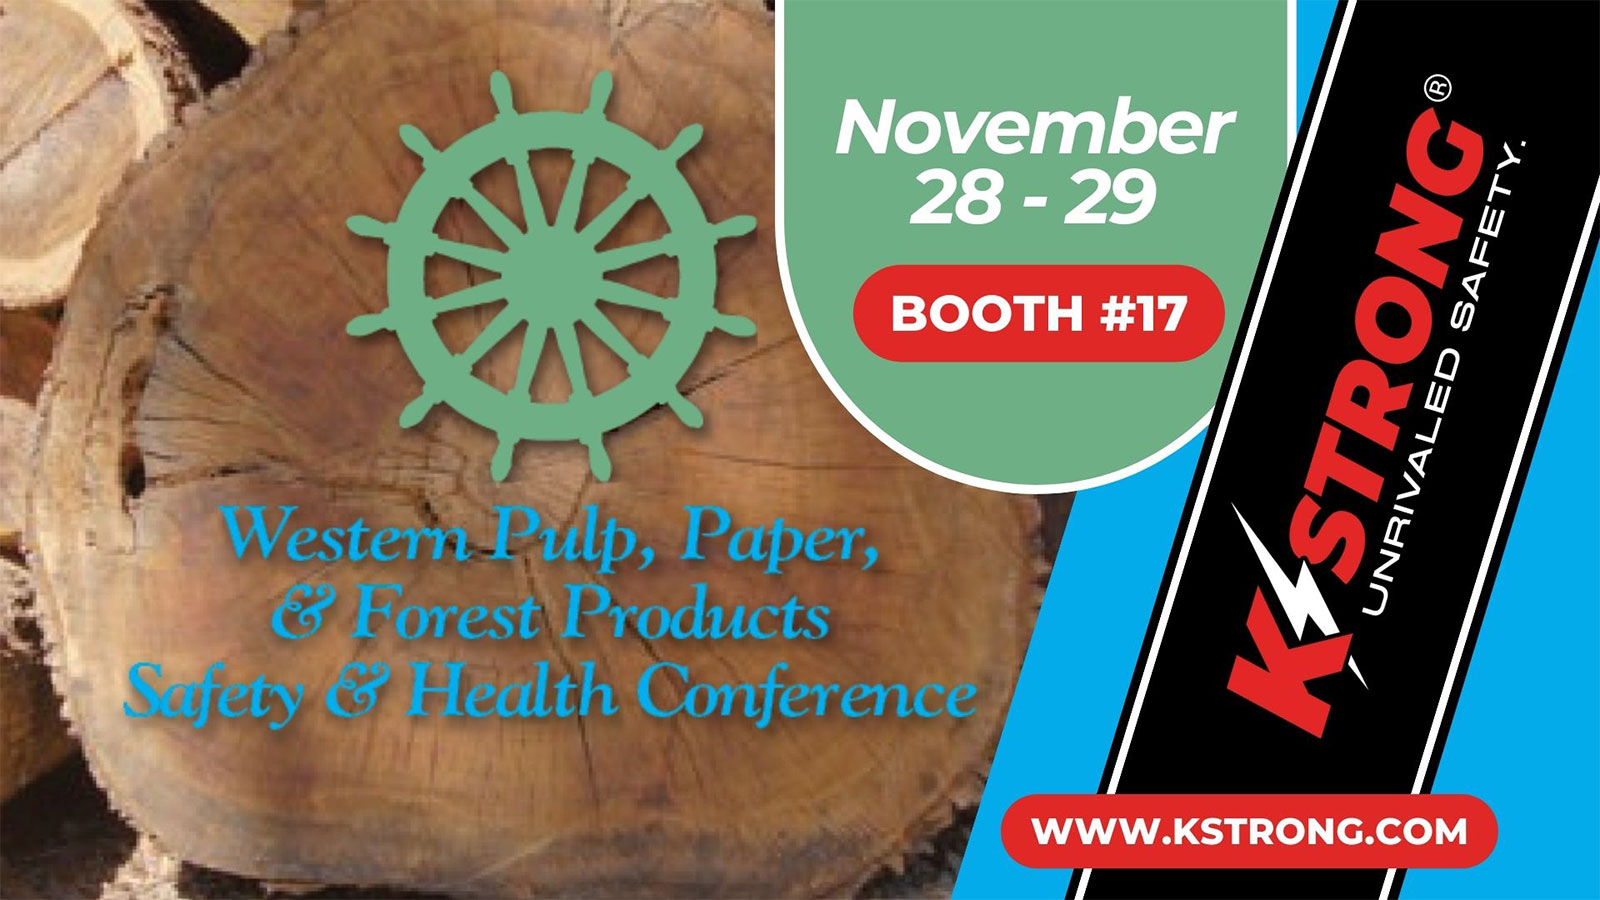 Western Pulp, Paper, & Forest Products Safety & Health Conference // November 28-29 // Portland, Oregon